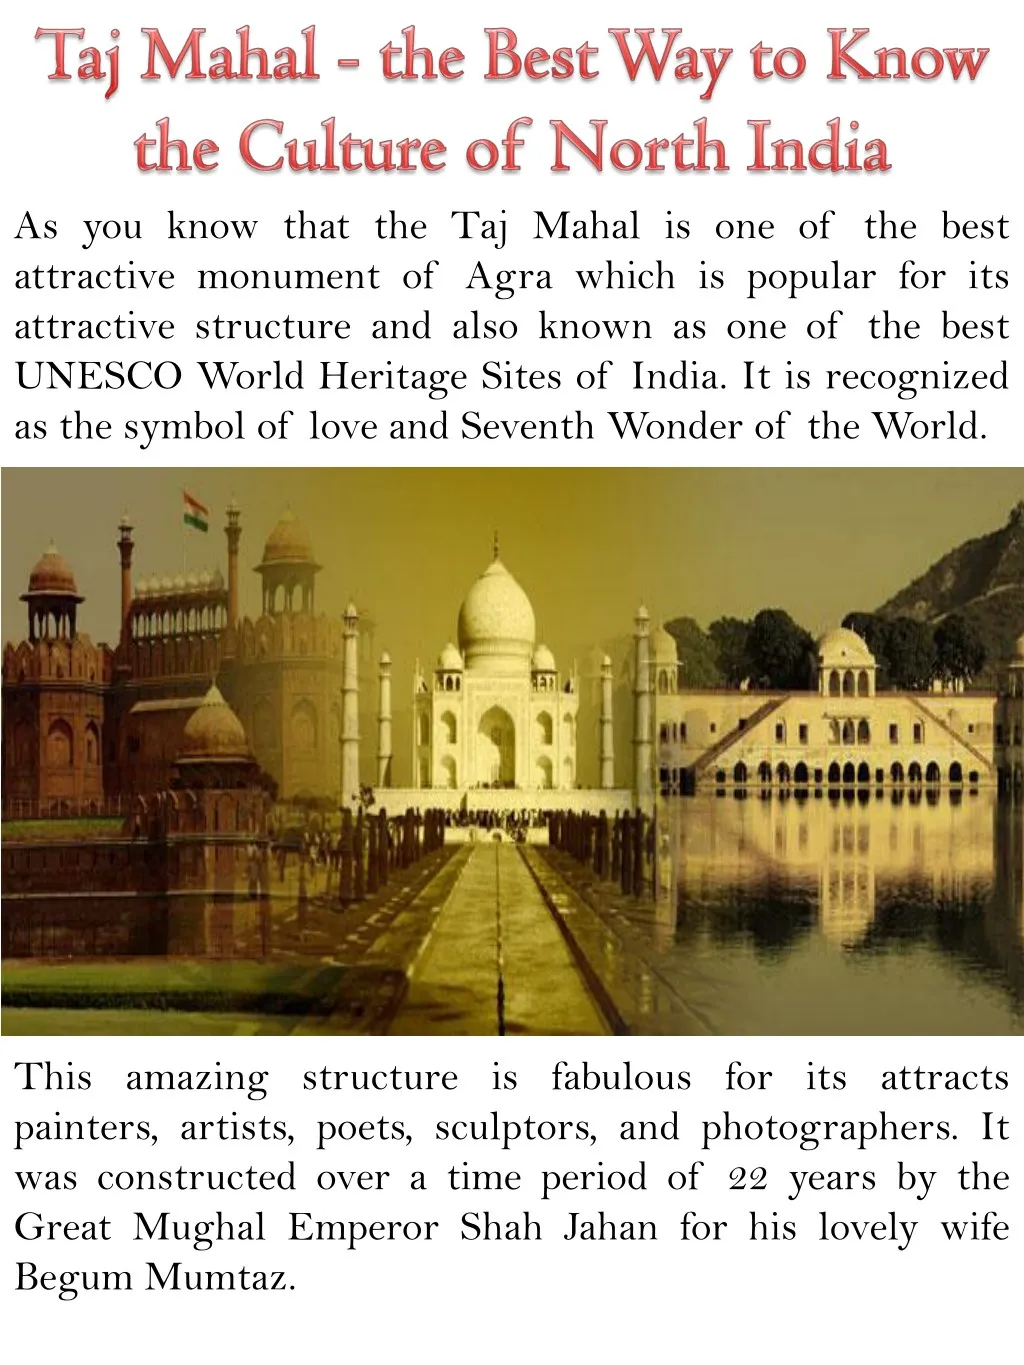 as you know that the taj mahal is one of the best